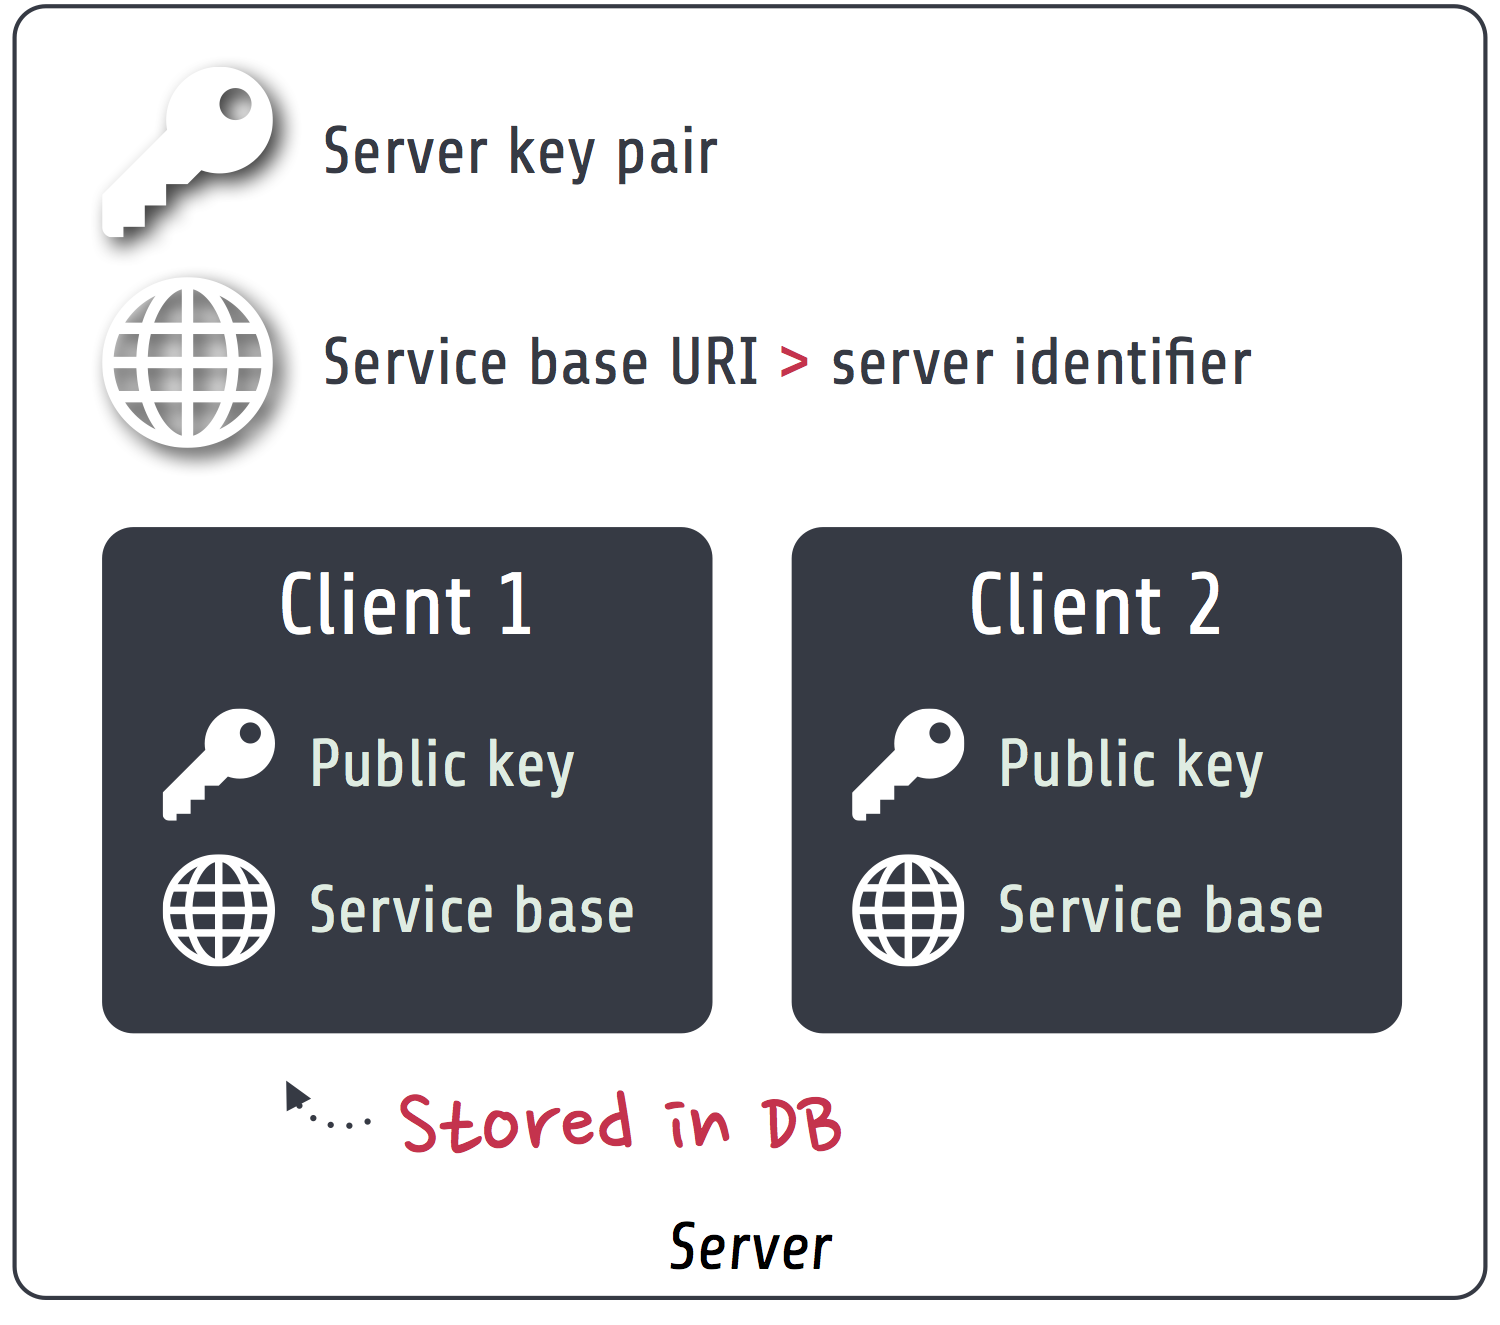 The server in detail